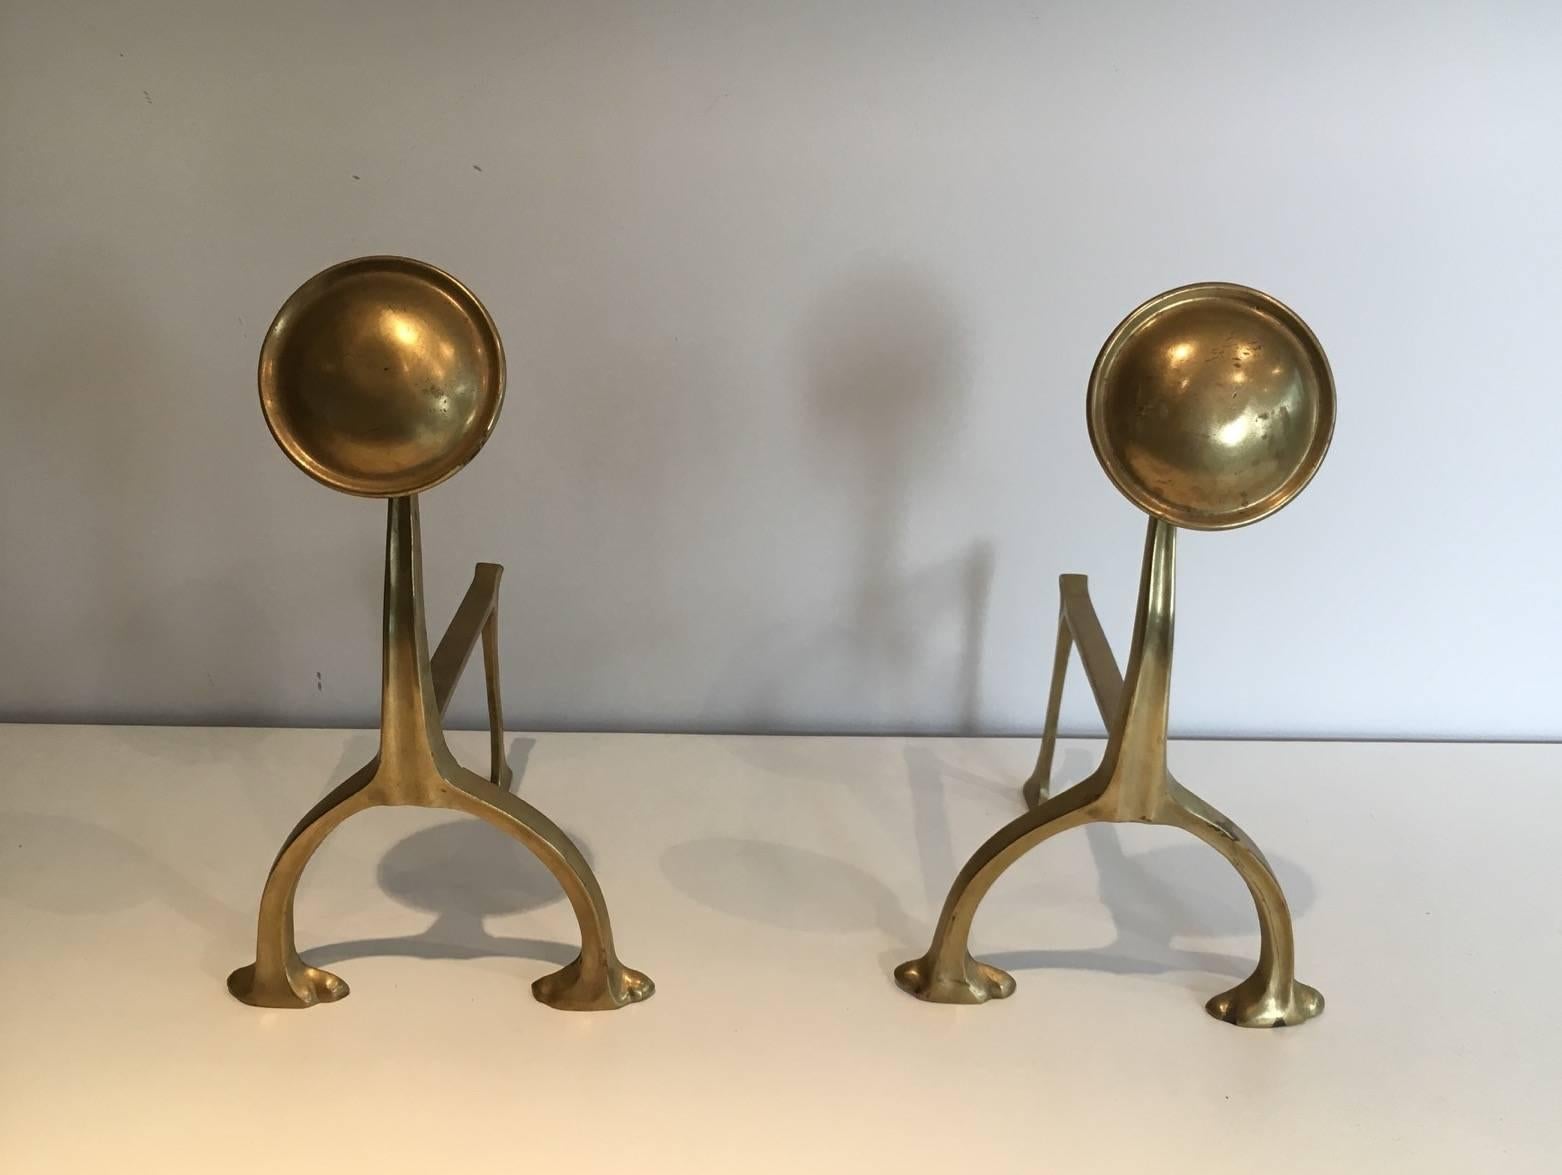 Pair of unique Arts & Crafts brass andirons, French, circa 1900

This piece is currently in France. Please allow us 2 to 4 weeks for delivery. Price includes delivery to our warehouse in Long Island City, NY.